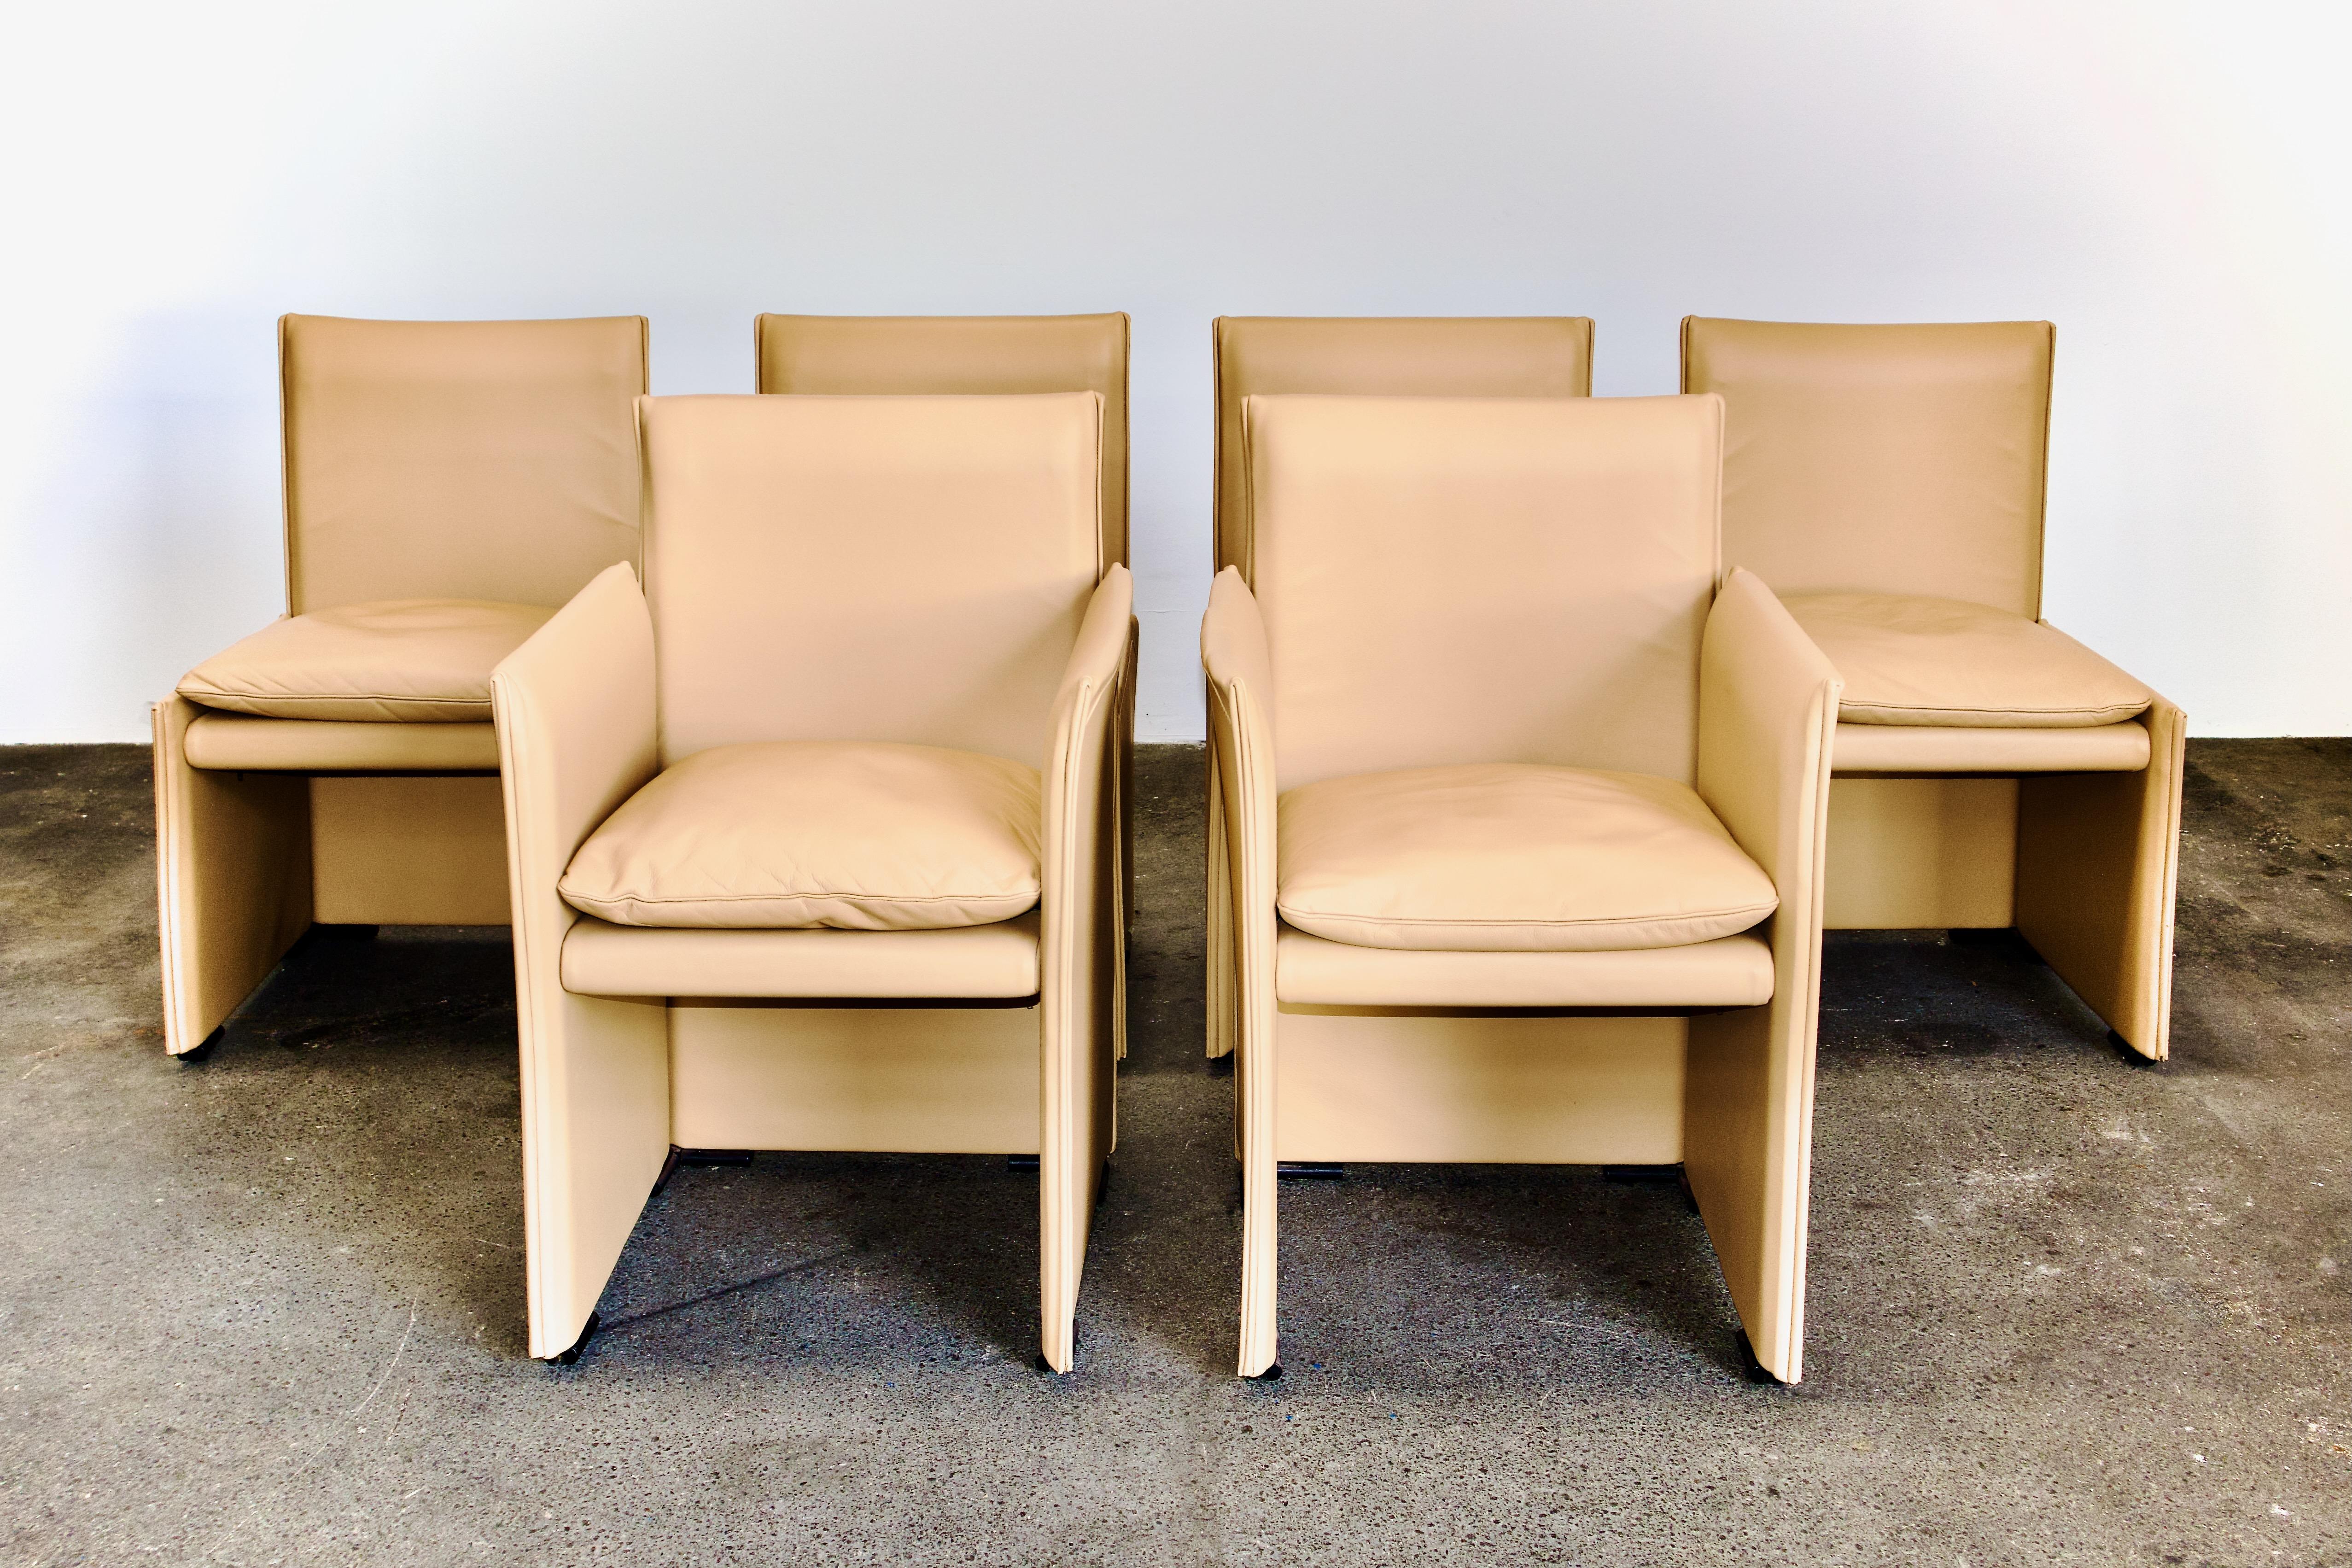 Rare set of 6 elegant tan leather 401 Break dining chairs by Mario Bellini for Cassina in marvelous condition. The set consists of two arm chairs and four chairs without arms.

The chairs have soft down filled cushions and the leather is wrapped